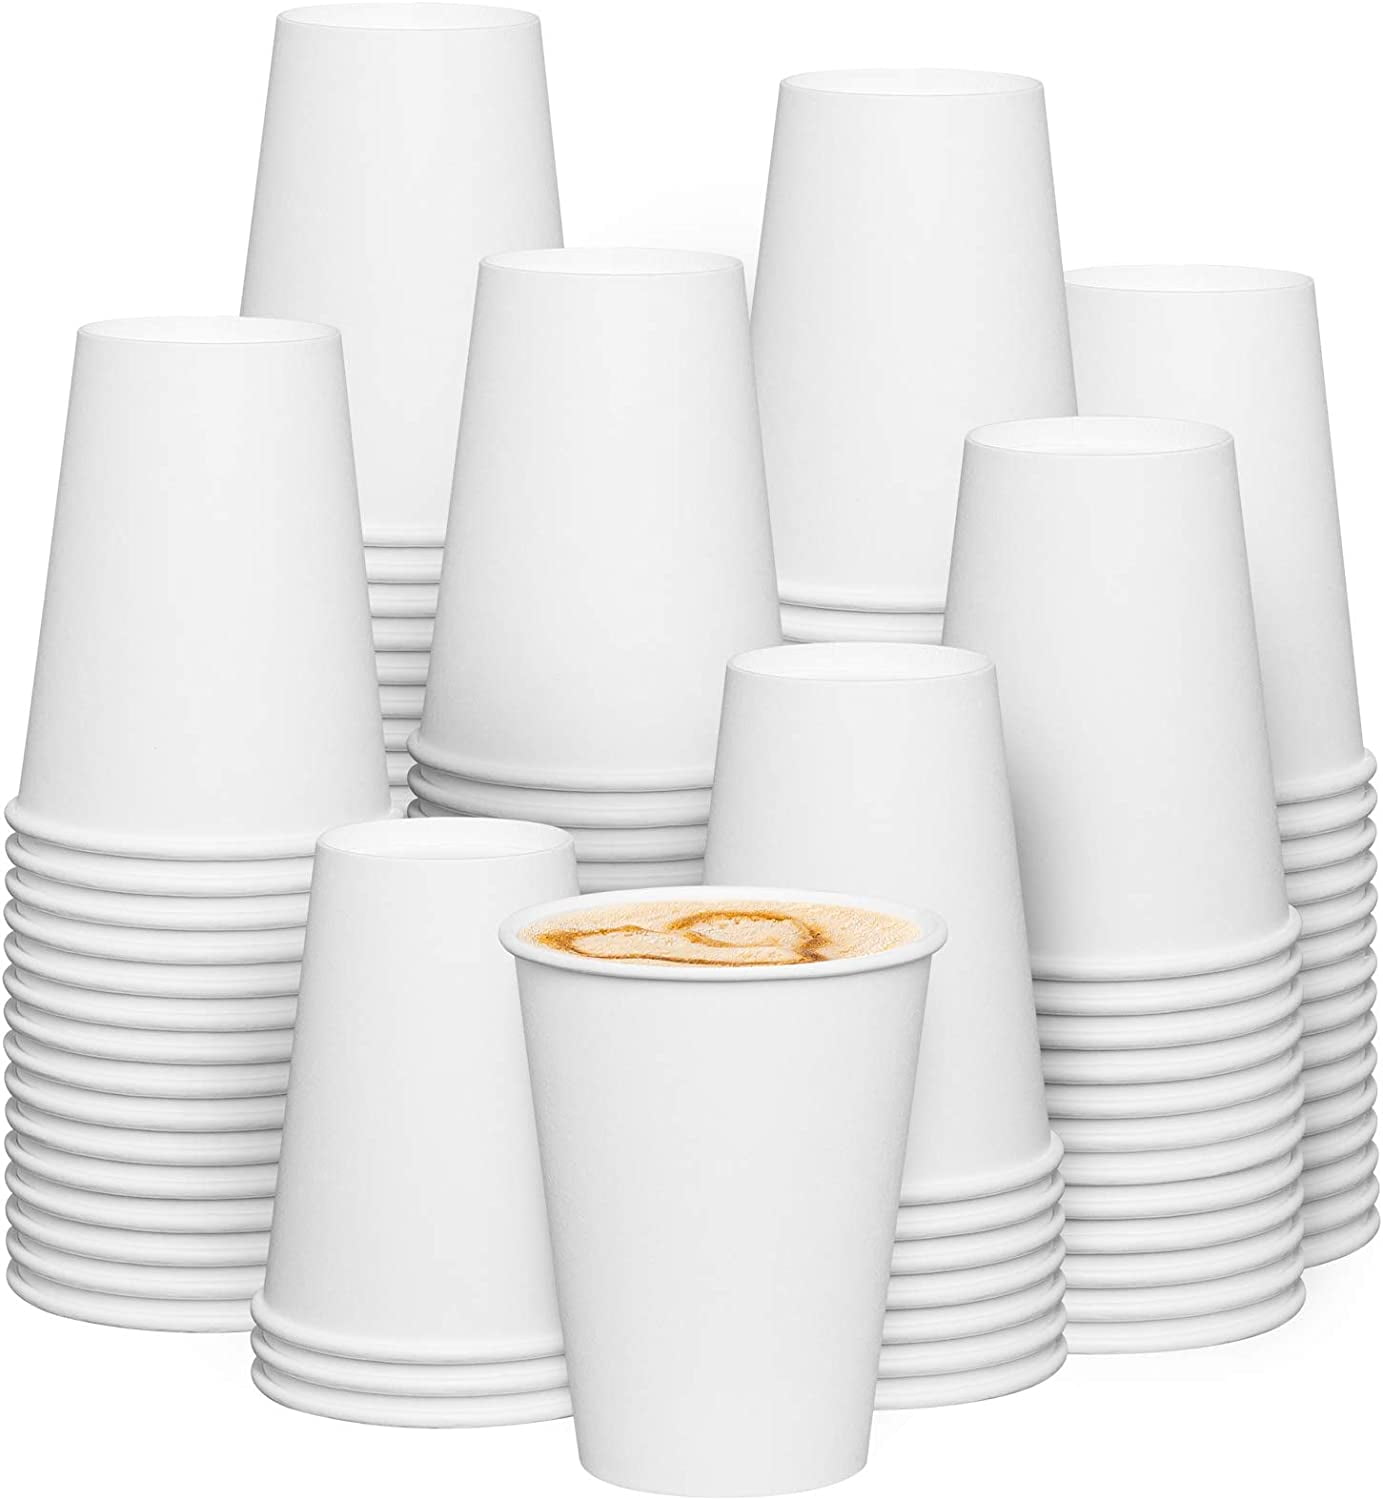 100pcs HIgh quality 90ml 3oz white disposable coffee cup small